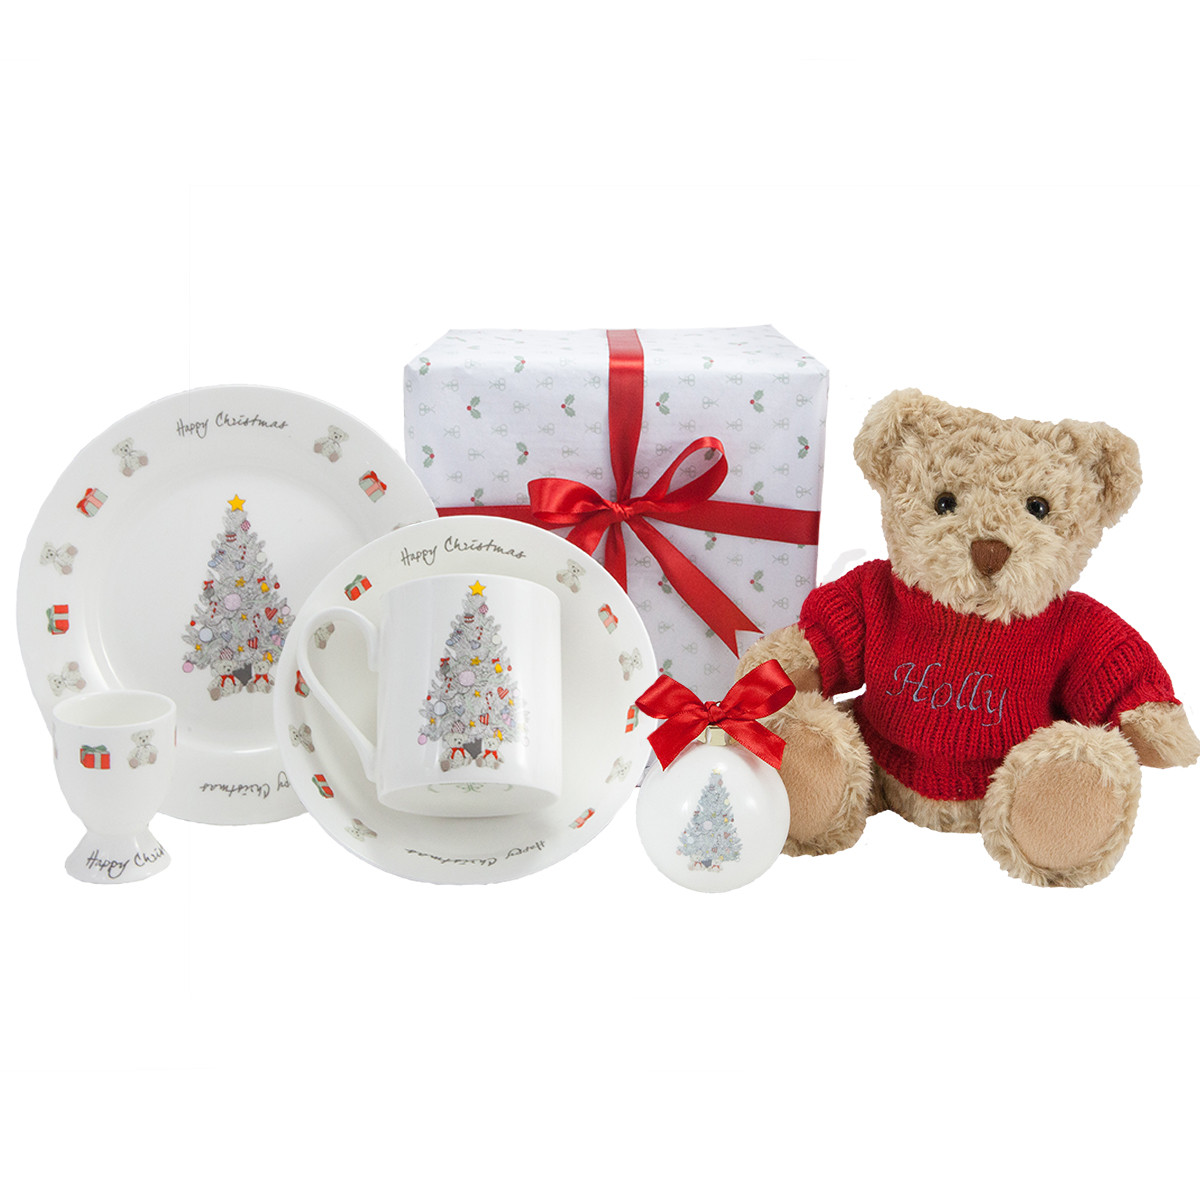 Baby'S 1St Christmas Gift Ideas
 Baby s First Christmas Gift Ideas The Syders